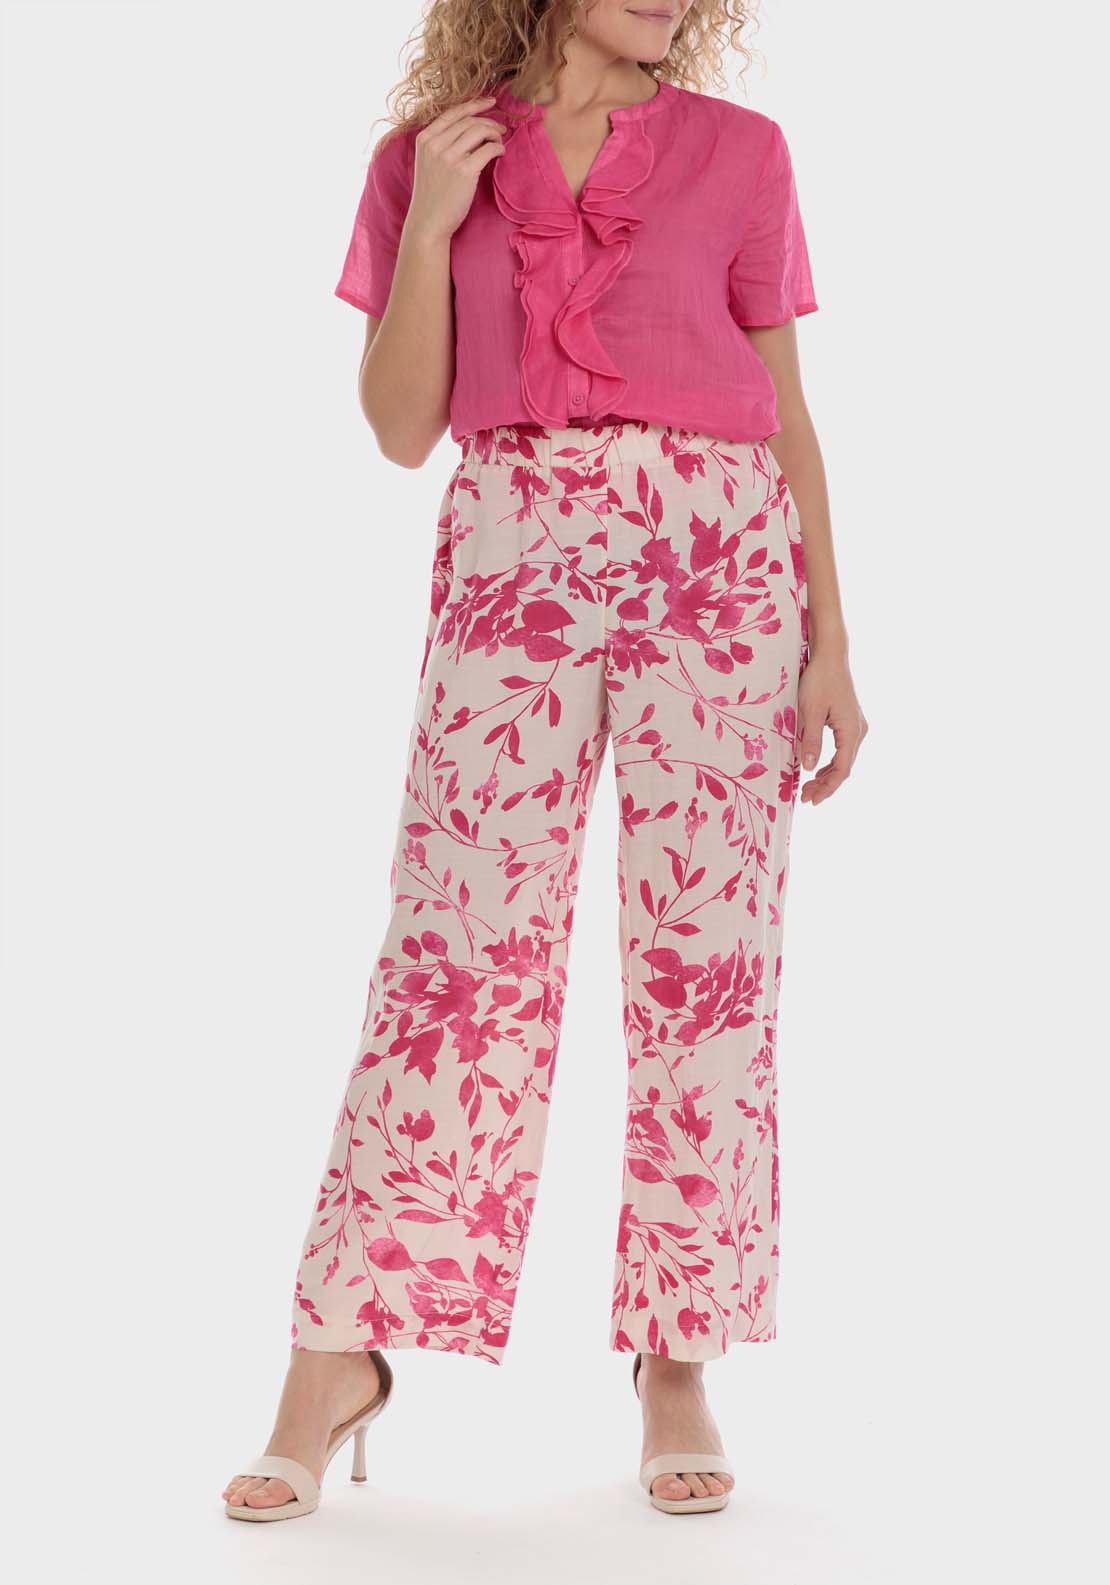 Punt Roma Printed Linen Trouser - Pink 4 Shaws Department Stores